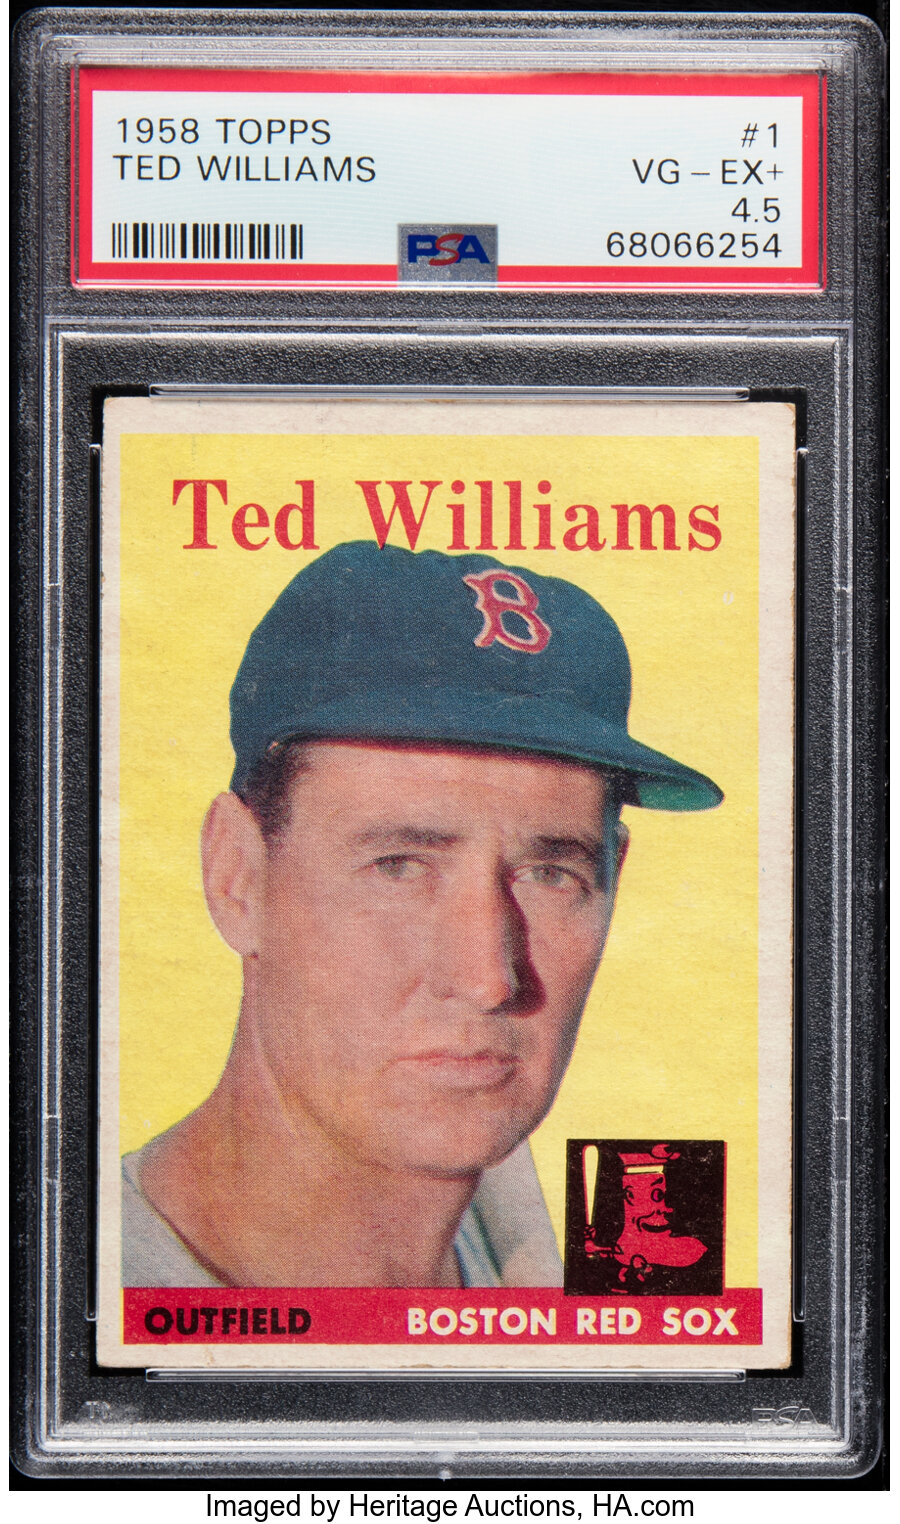 1958 Topps Ted Williams #1 PSA VG-EX+ 4.5